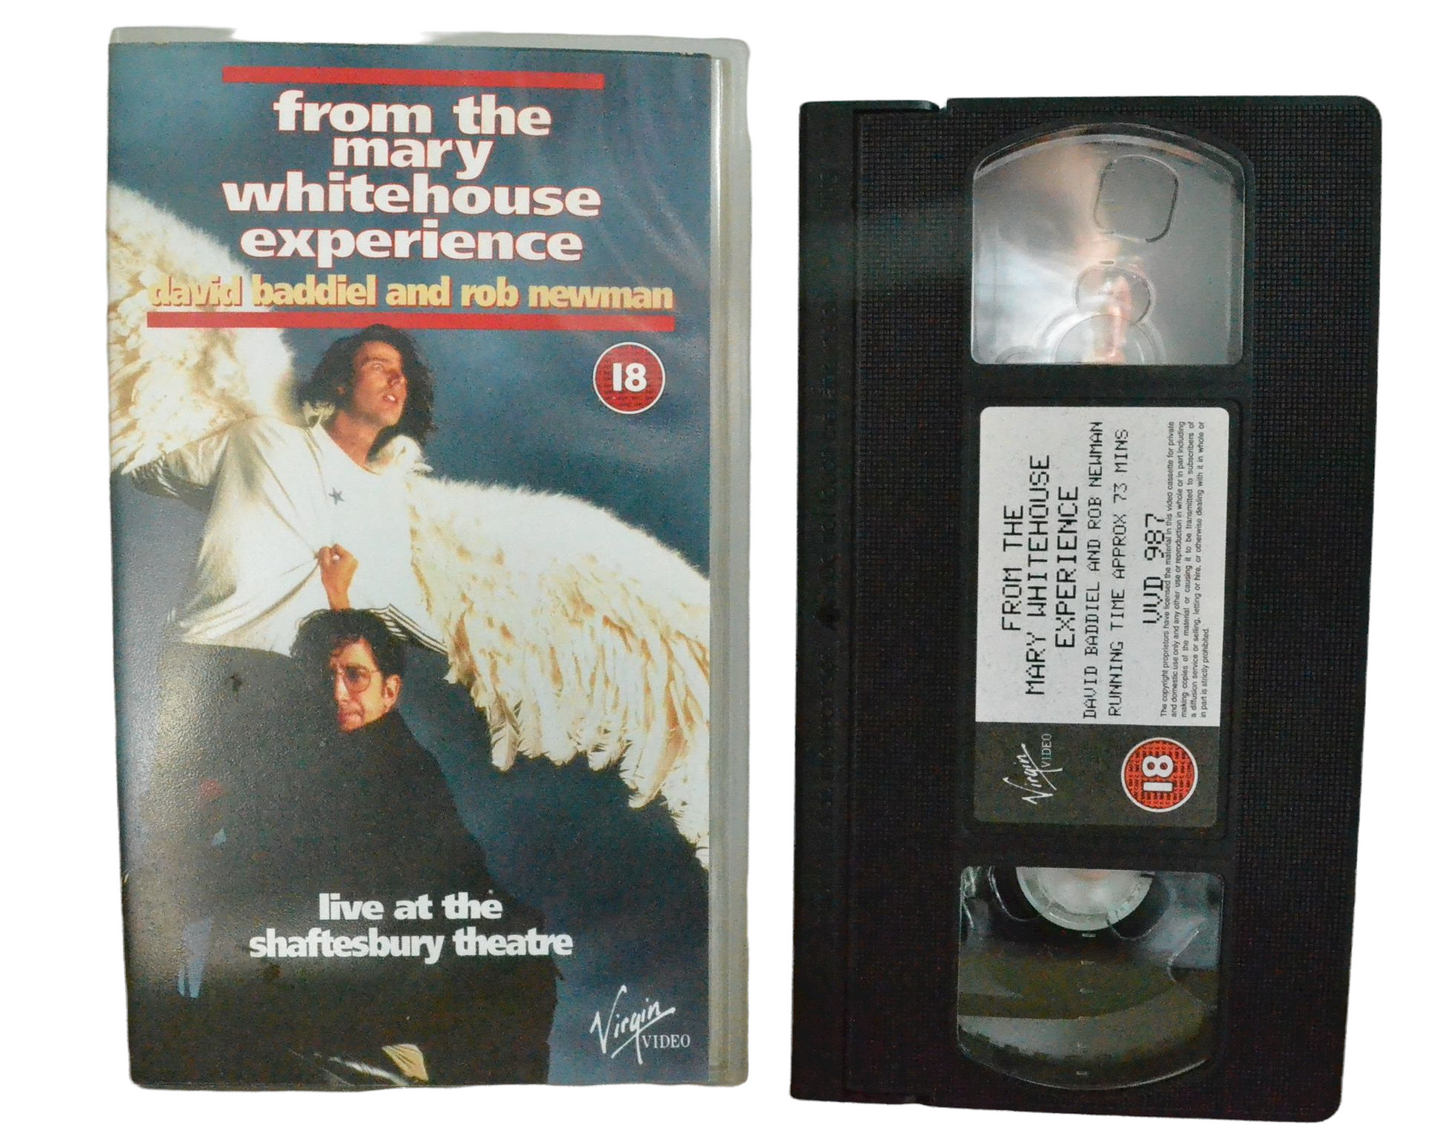 From The Mary Whitehouse Experience - David Baddiel - Virgin Video - Comedy - Pal VHS-